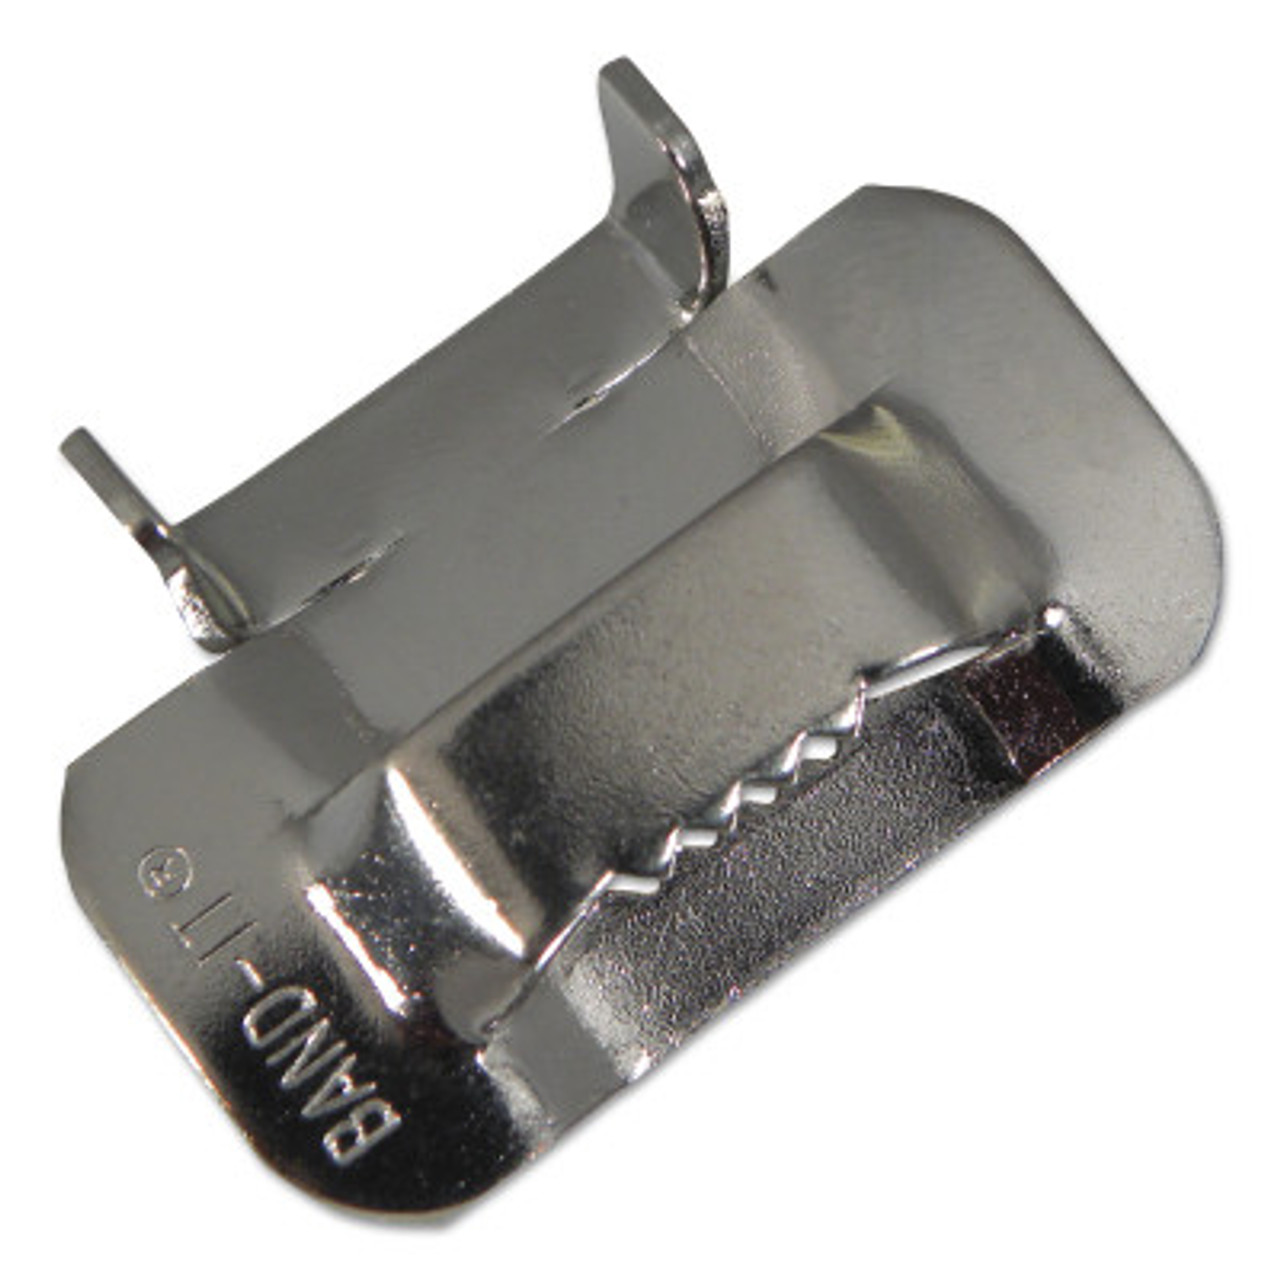 Band-It®, Stainless Steel Strapping